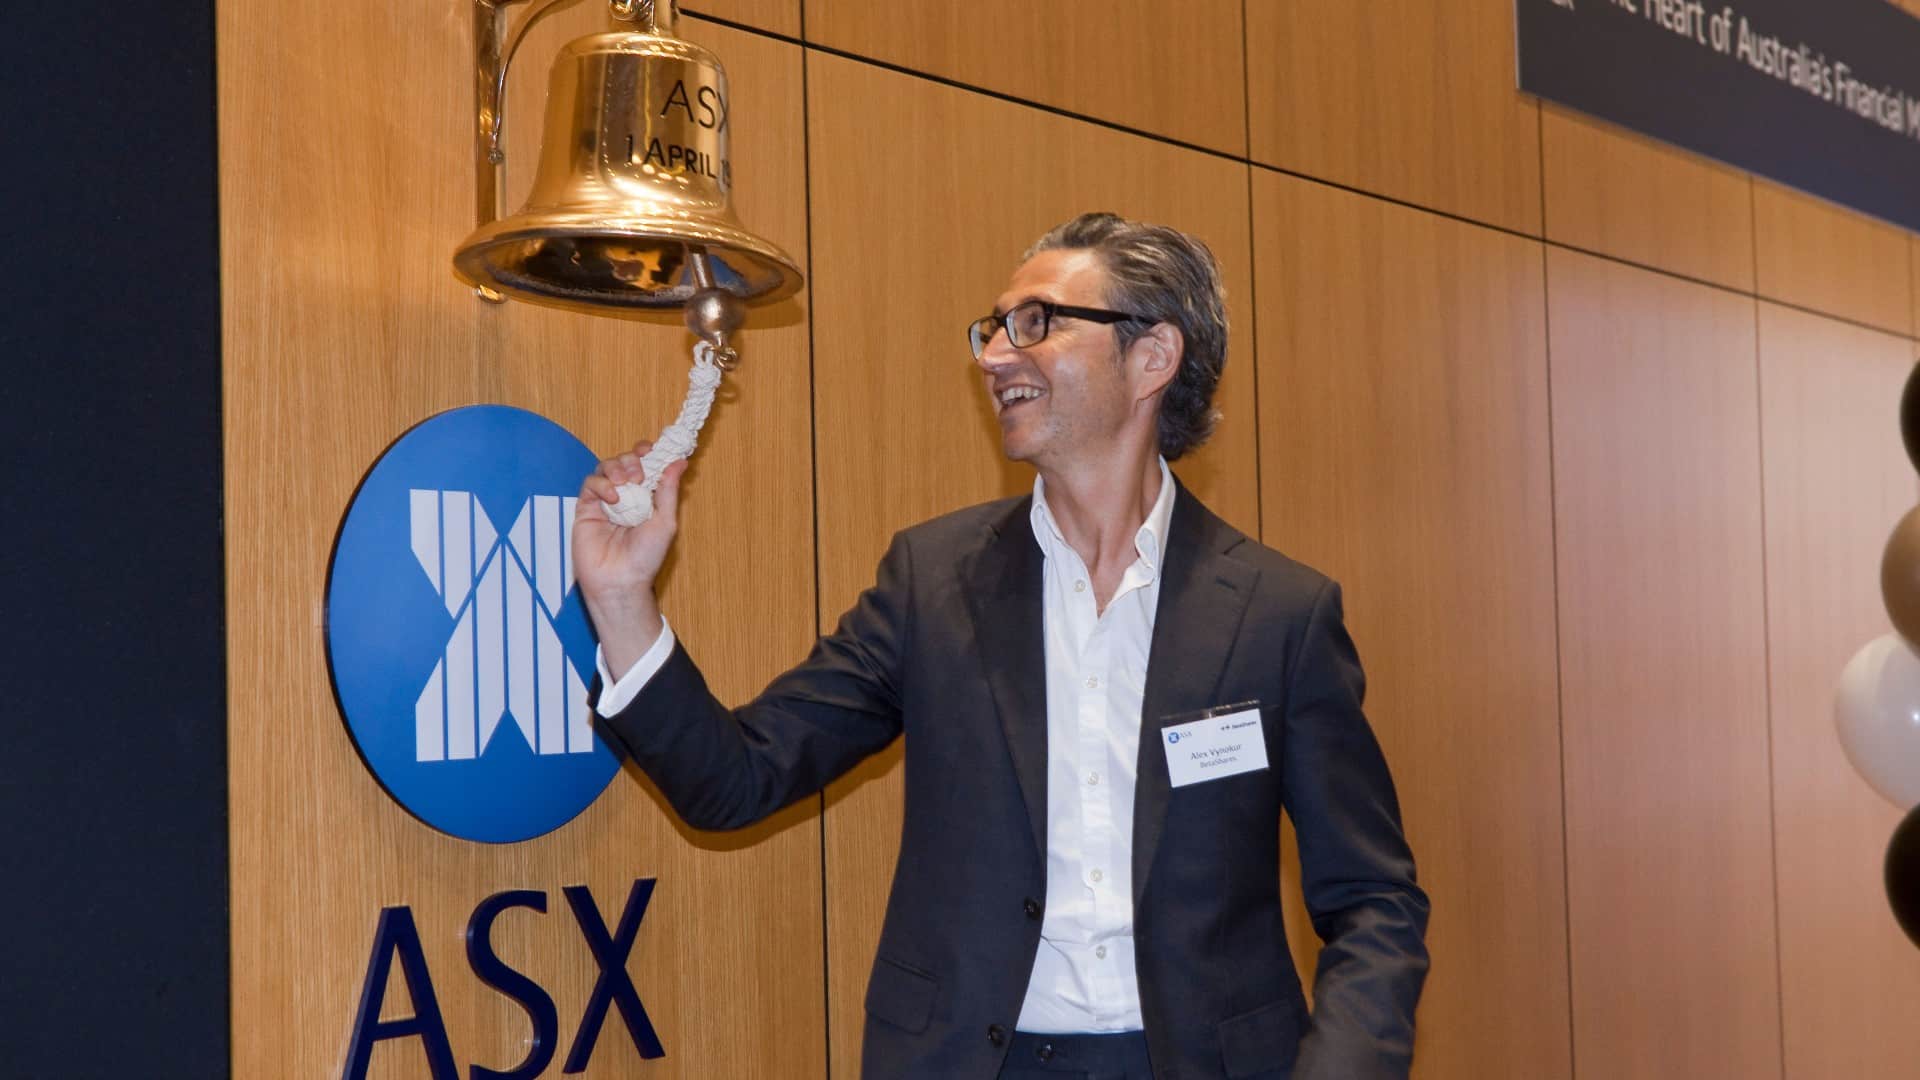 BetaShares CEO, Alex Vynokur rings the bell at the ASX.